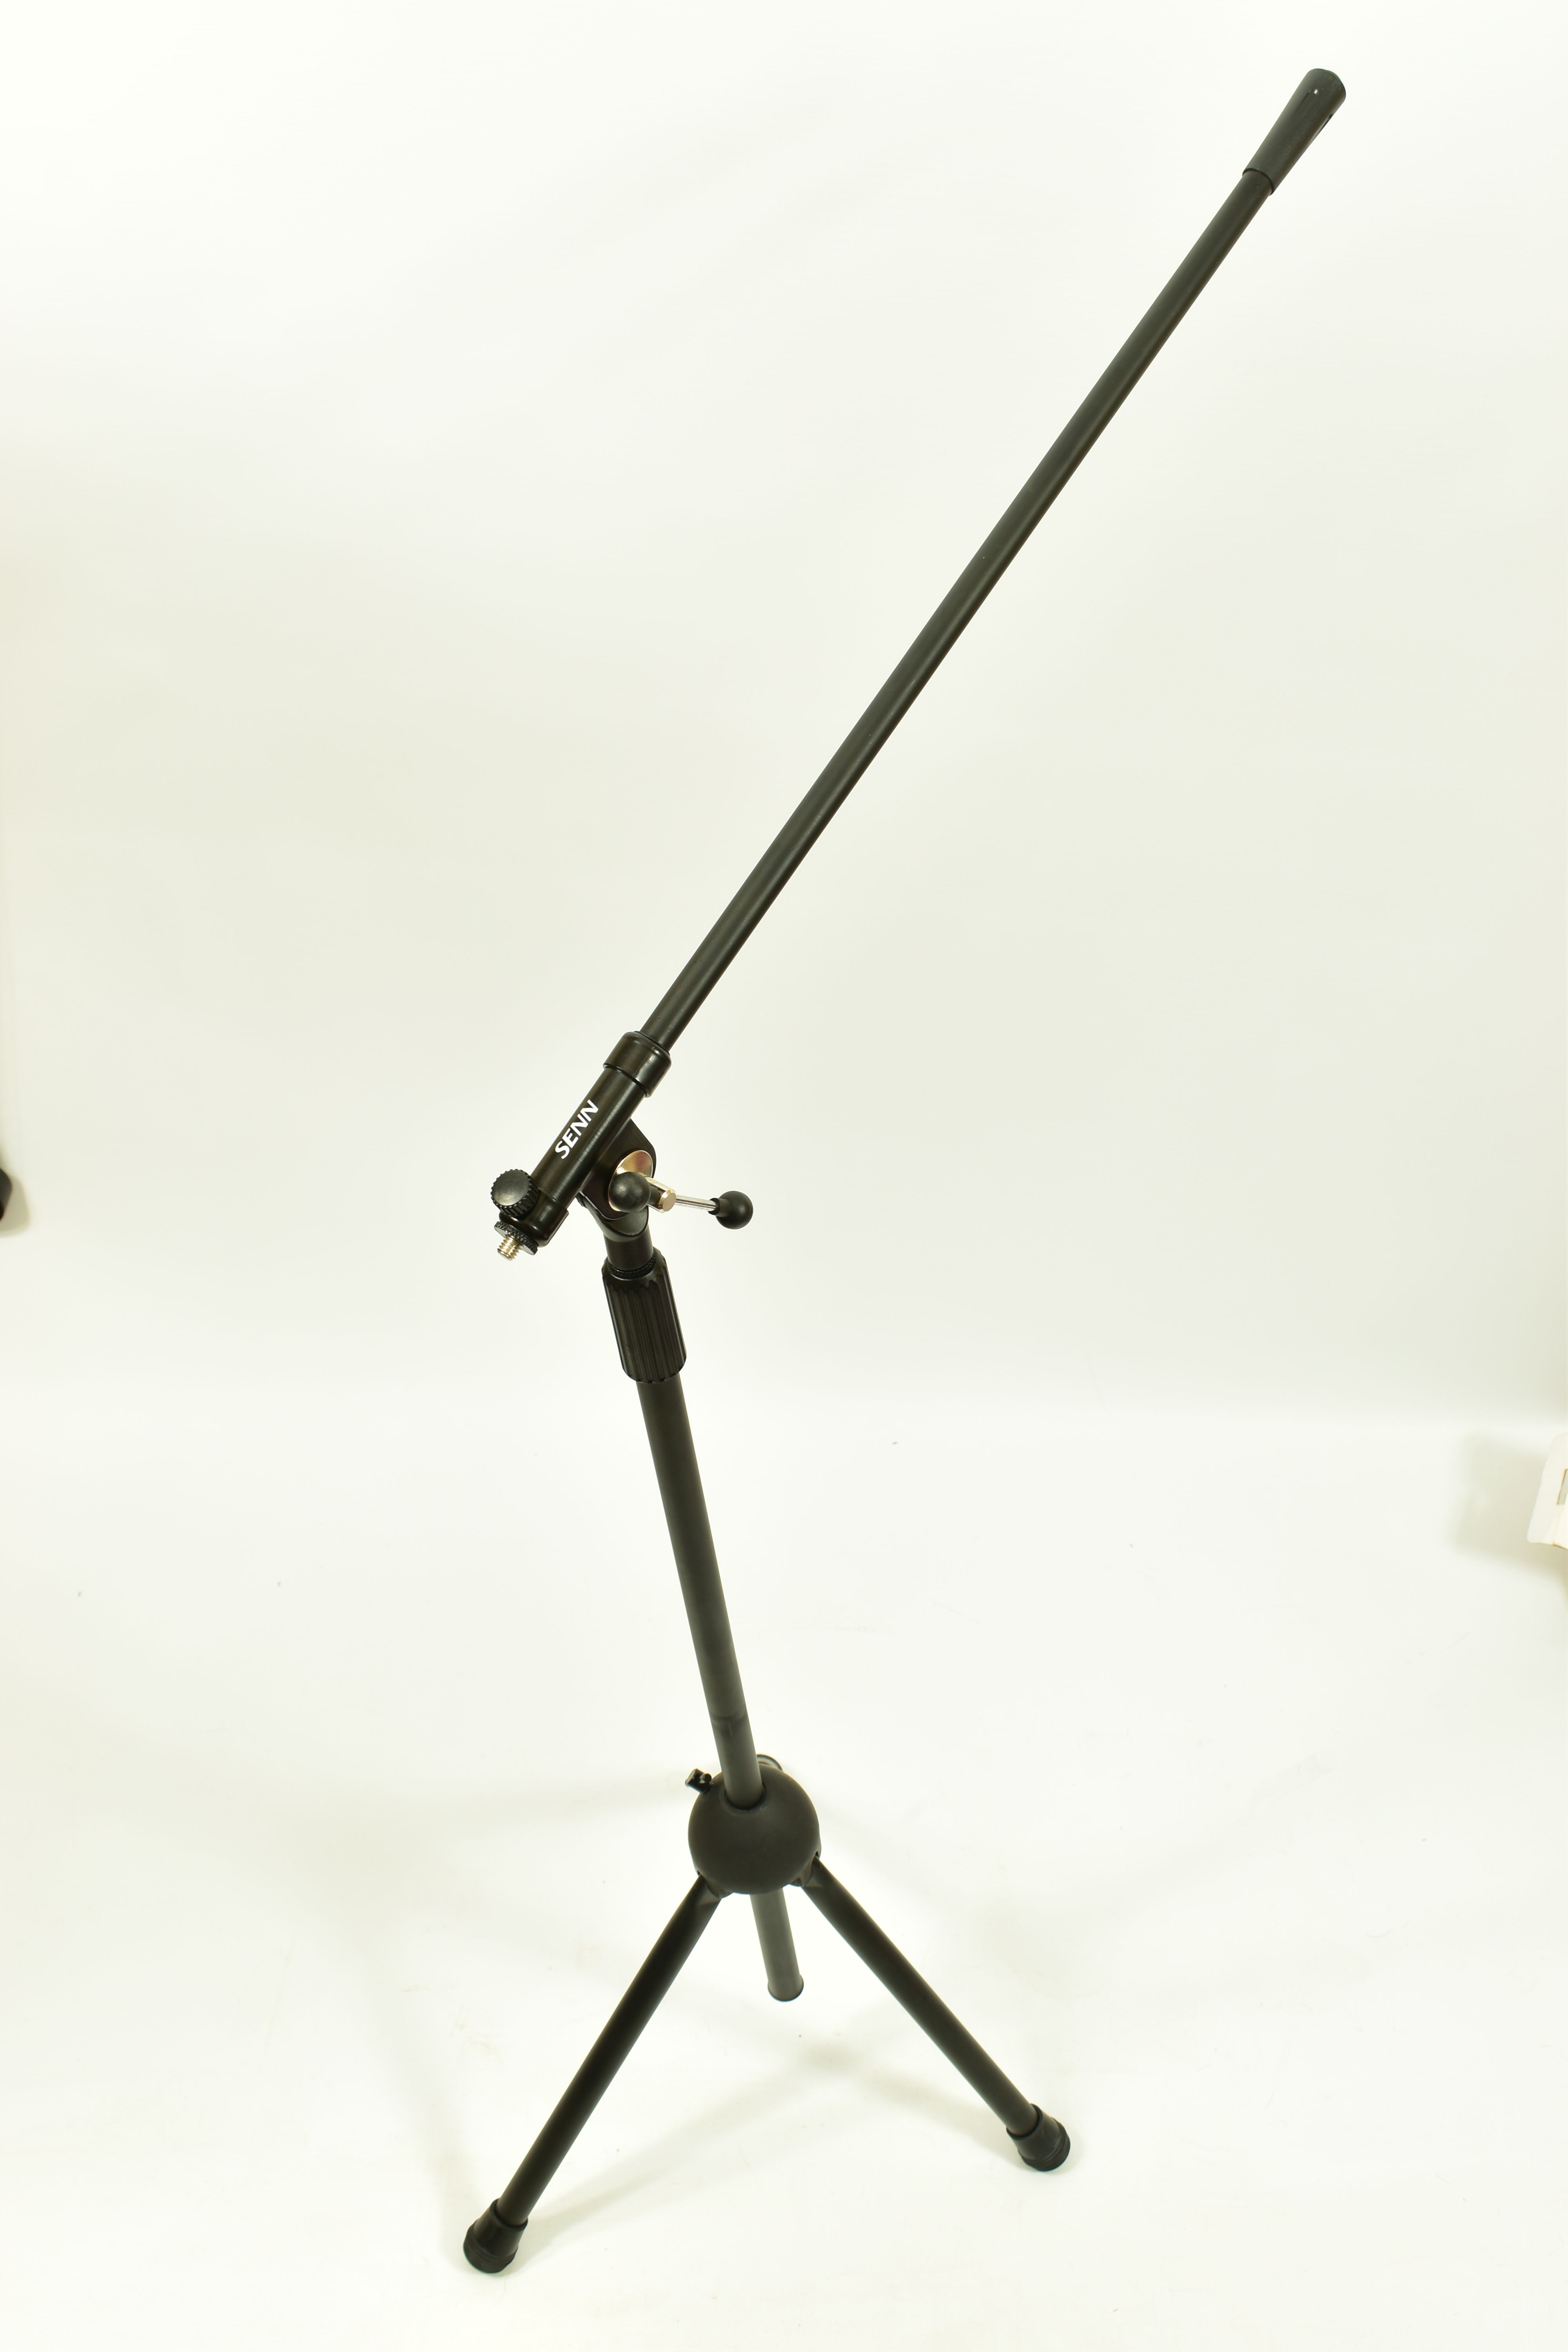 THREE BOXED AND ALMOST NEW SENN PM-200 BOOM MIC STANDS and a vintage straight mic stand with a - Image 3 of 4